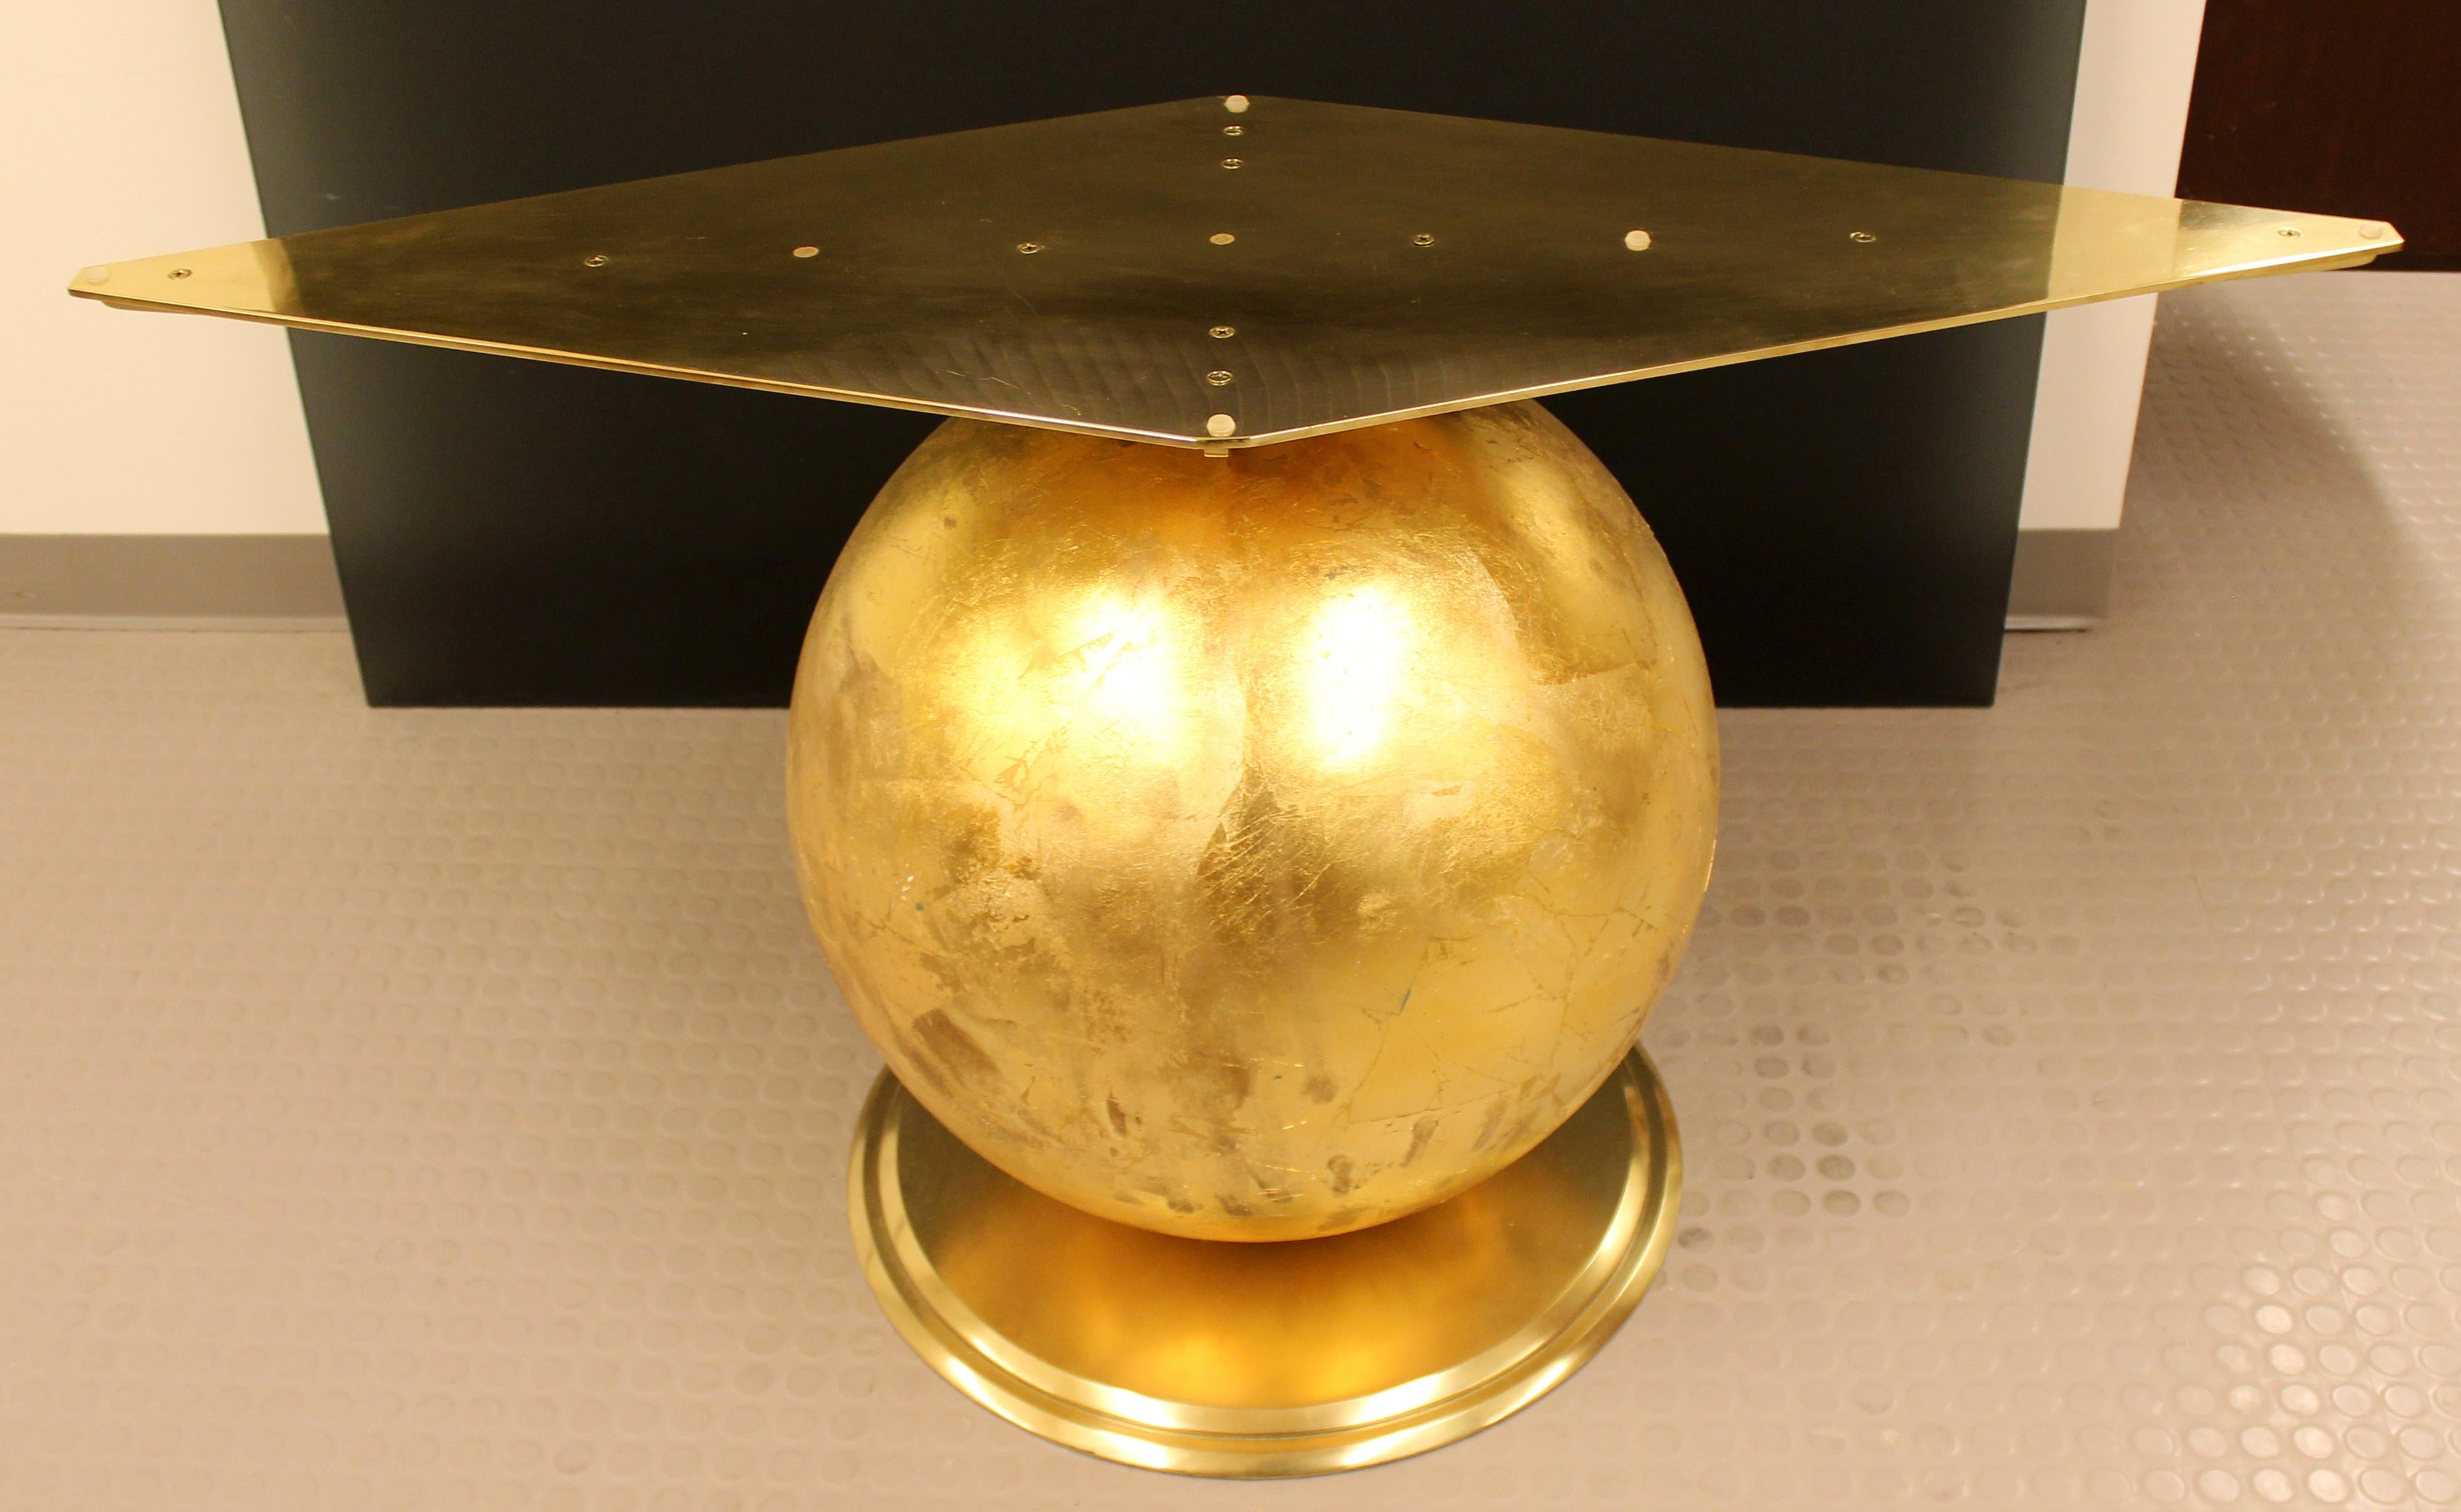 For your consideration is a gorgeous, Hollywood Regency style table base, made of metal and gold leaf. Can be used with glass, smoked glass, marble or travertine. In excellent vintage condition. The dimensions are 54